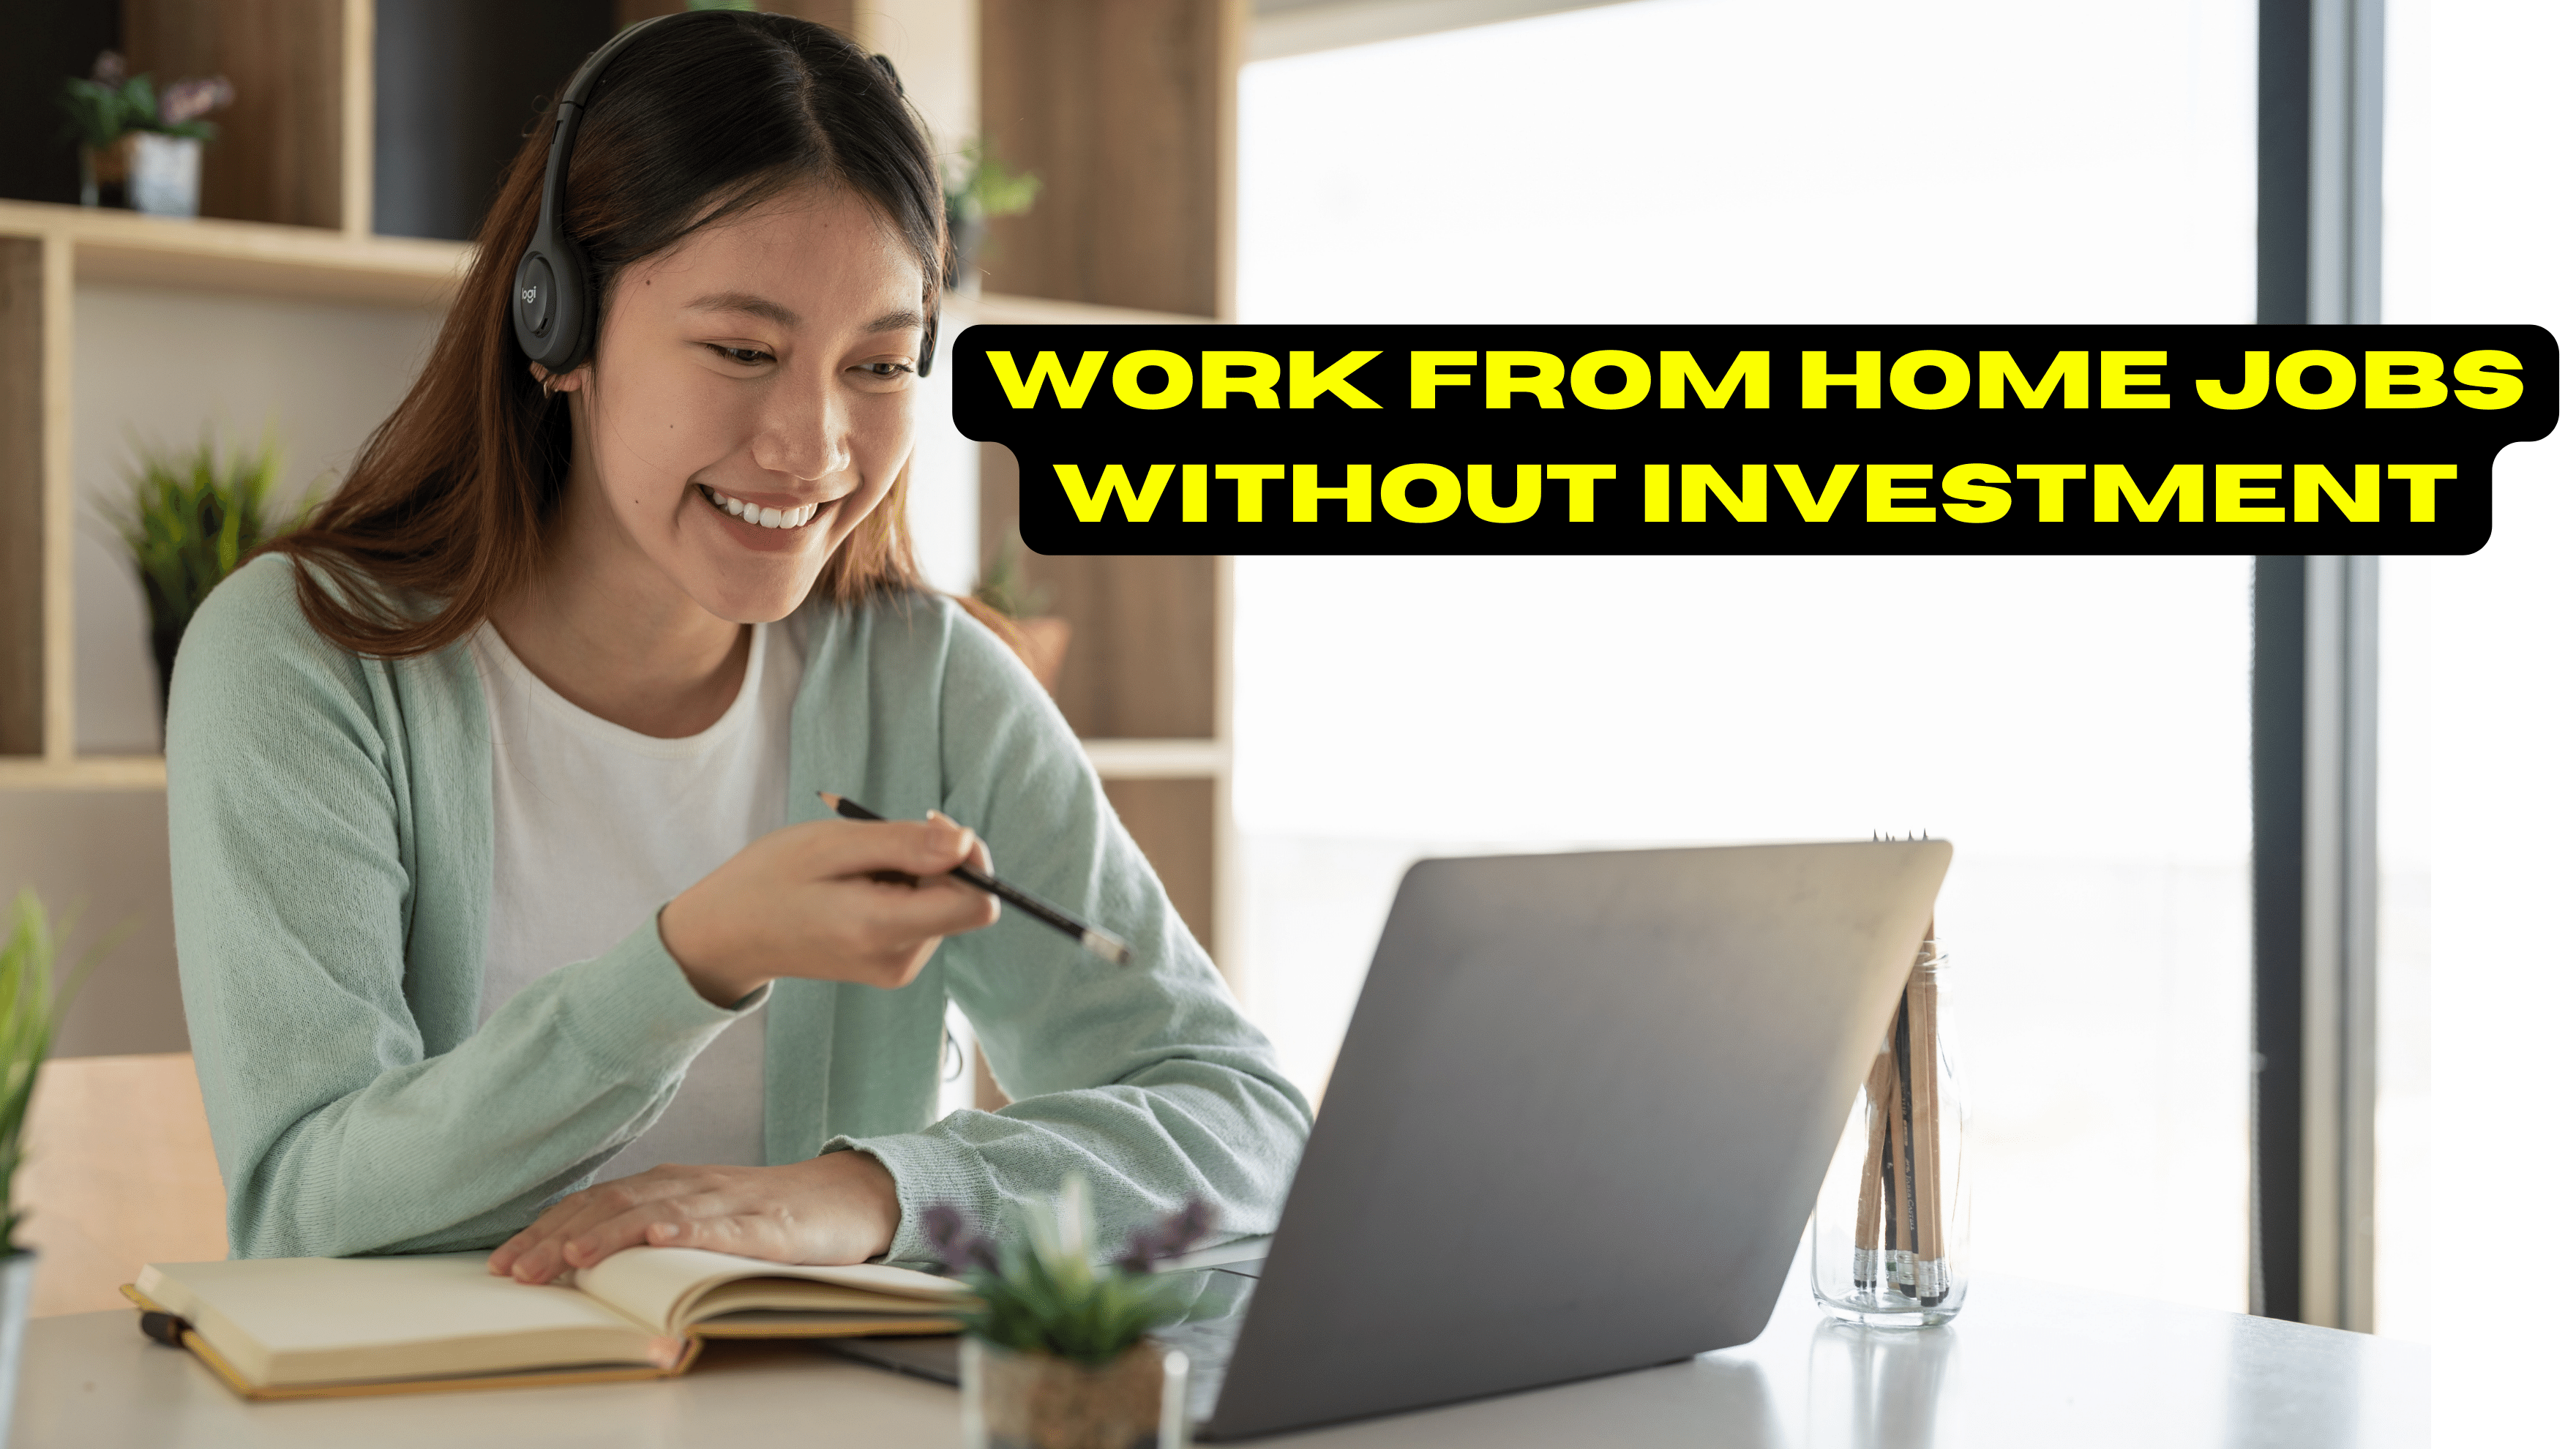 Work from home jobs without investment